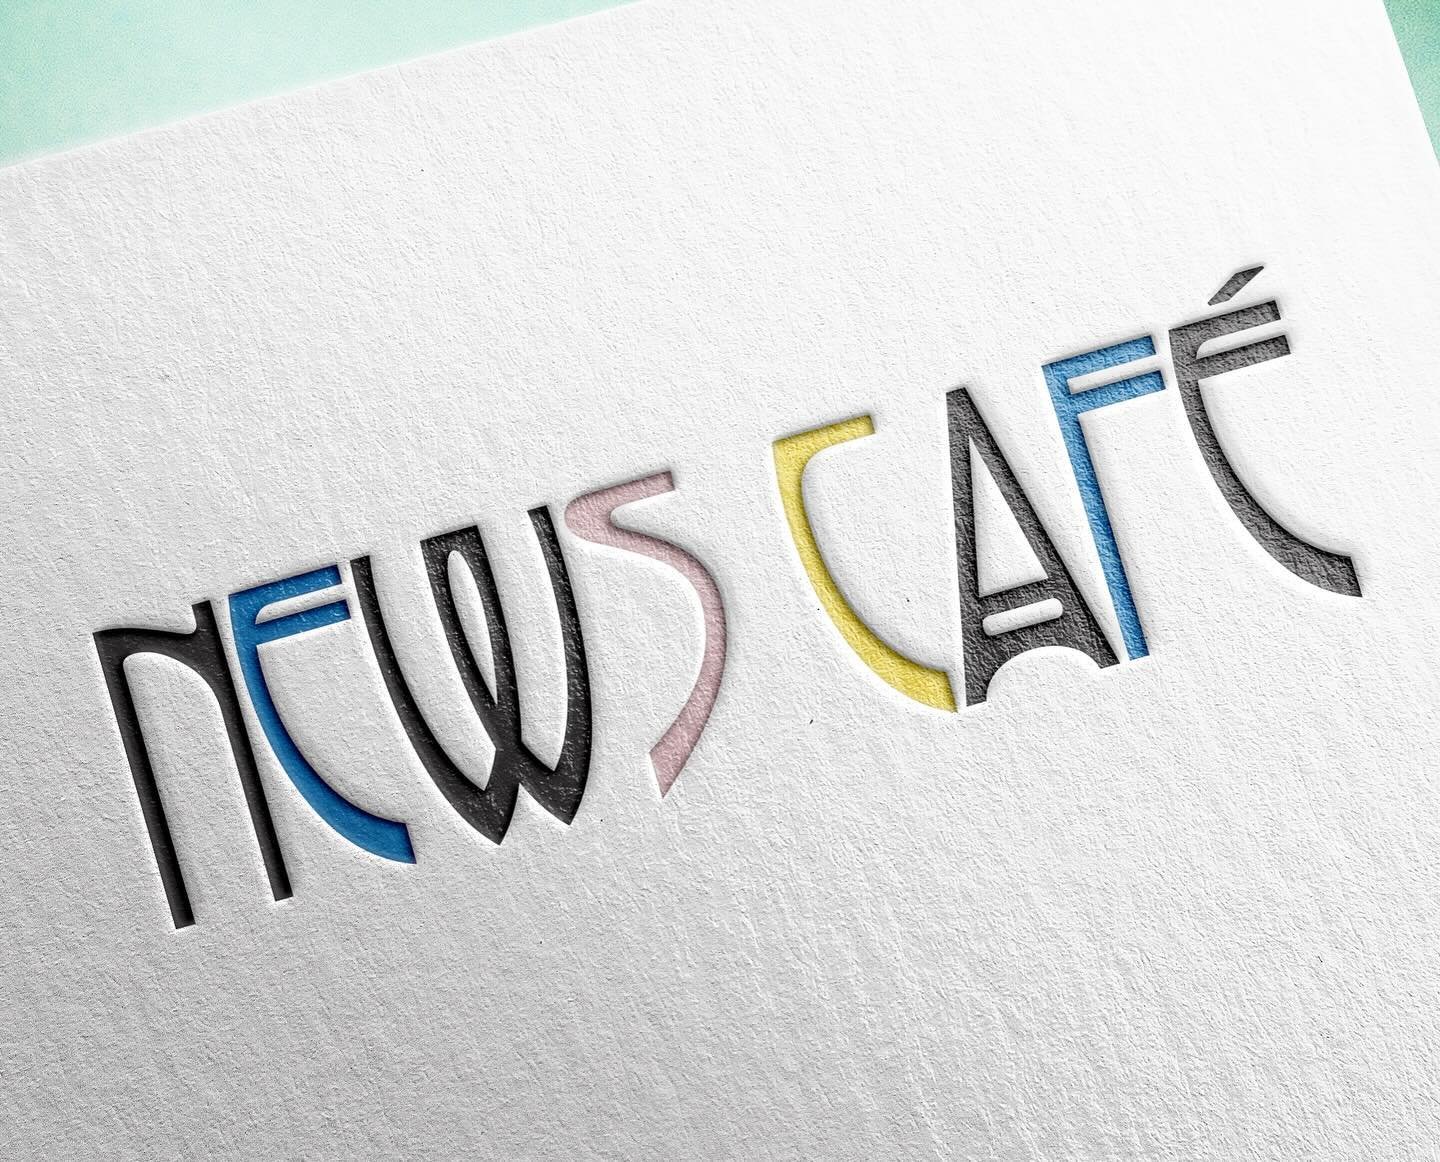 New work for the News Caf&eacute;. A new bar, cafe and dining experience come to Salisbury and Plymouth. Opening very soon. S+B
-
-
-
-
-
-
-
#branding #design #creative #logo #logodesigner #logos #logodesigns #logoinspirations #logotype #typography 